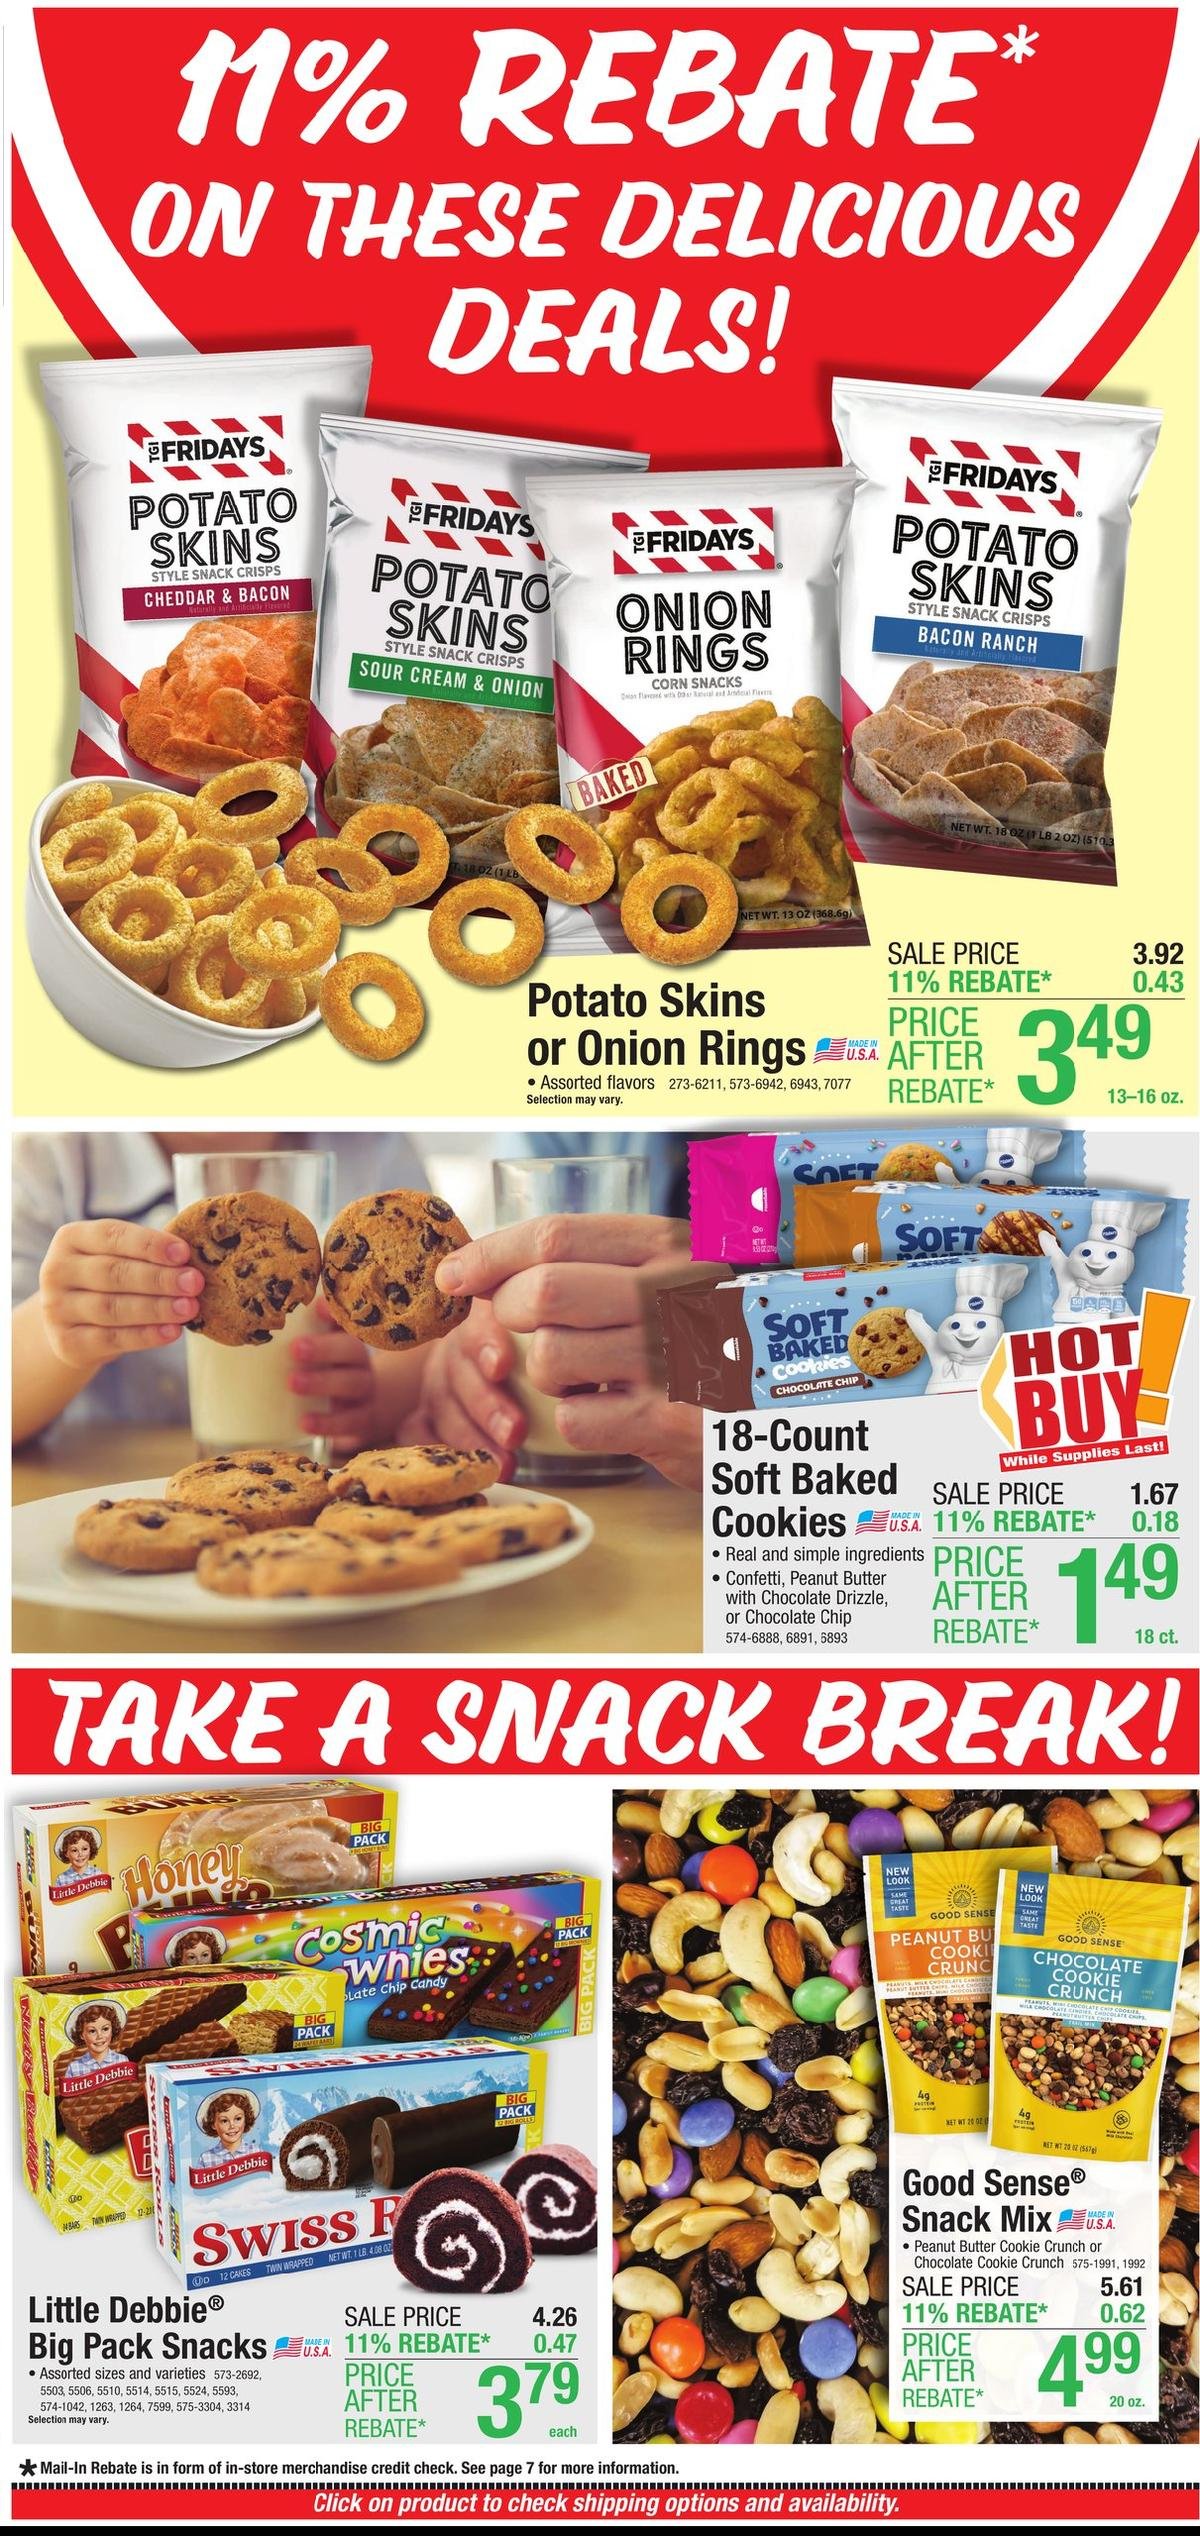 Menards weekly ad - page 2